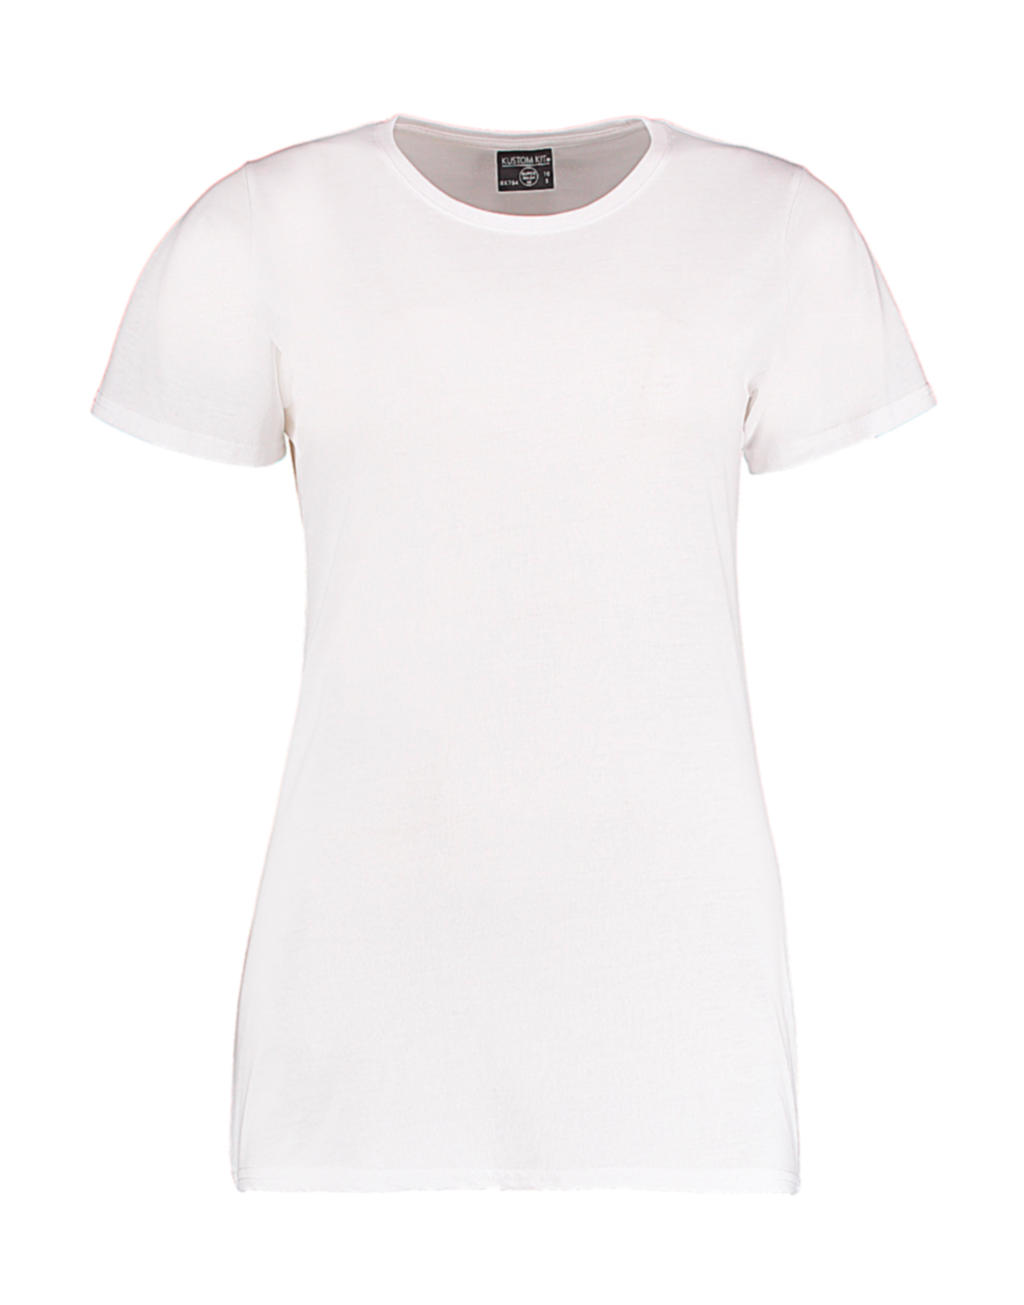  Womens Fashion Fit Superwash? 60? Tee in Farbe White